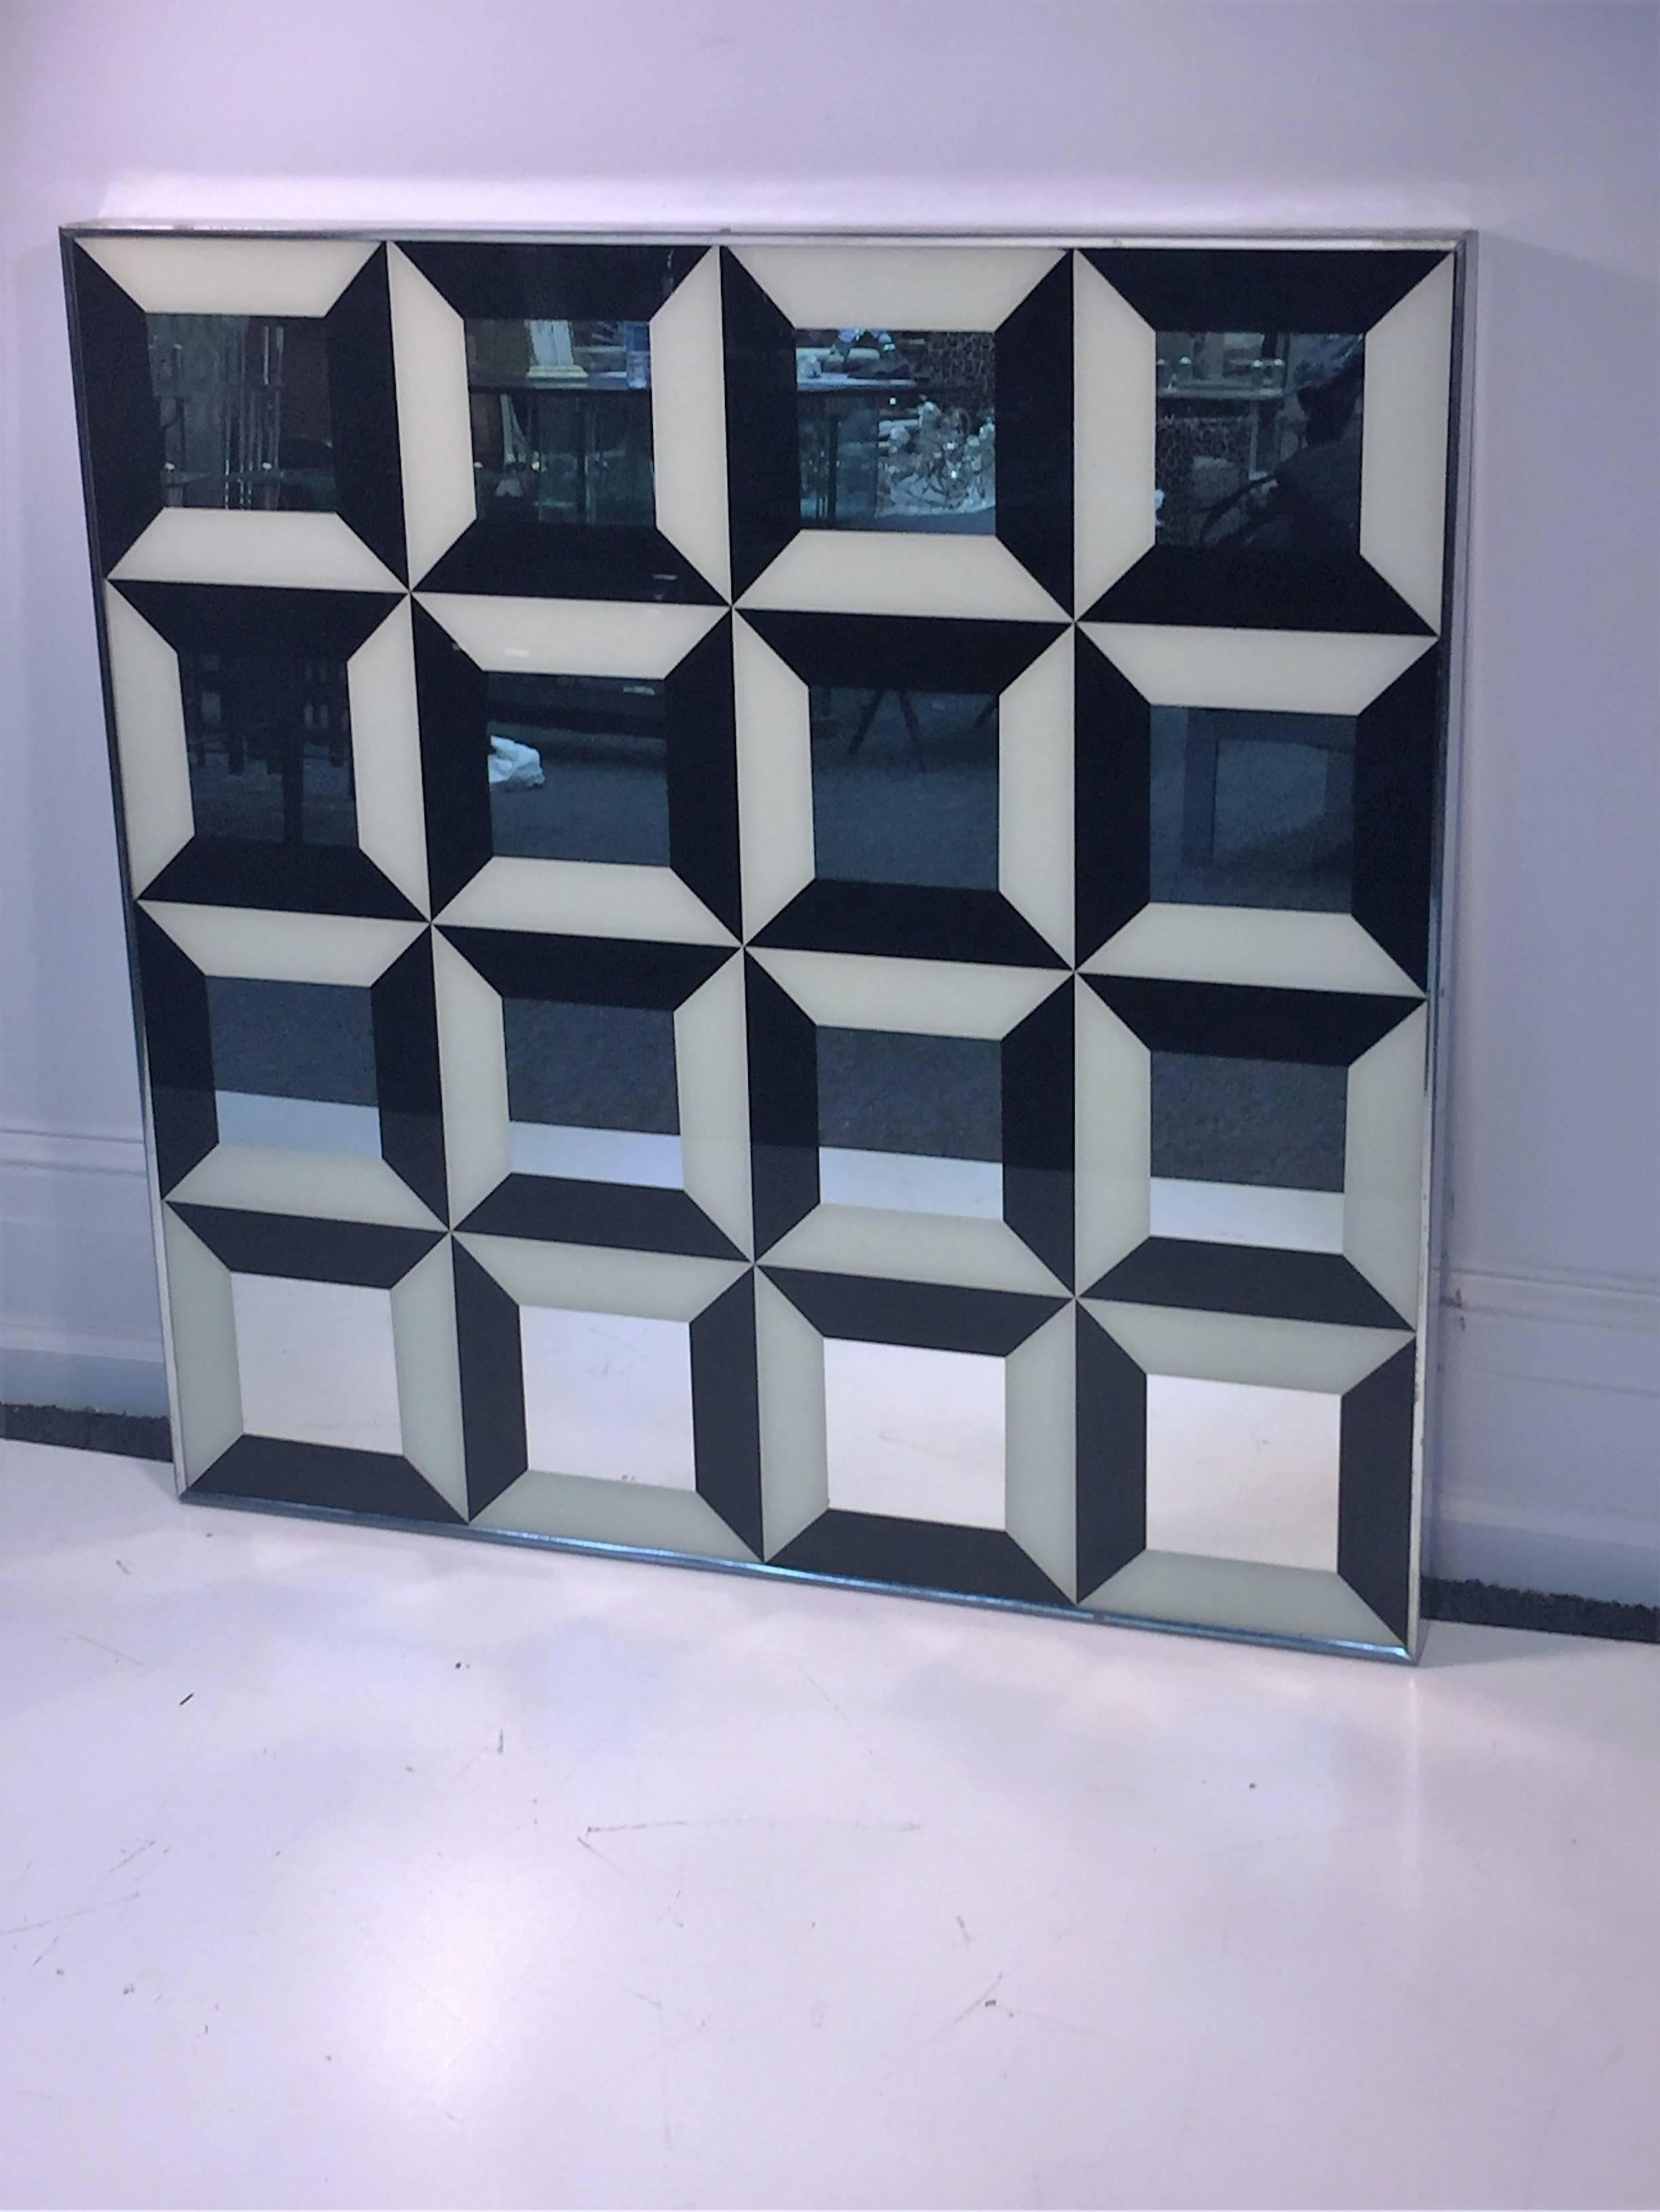 Dramatic Verner Panton Black and White Optical Mirror In Excellent Condition For Sale In Mount Penn, PA